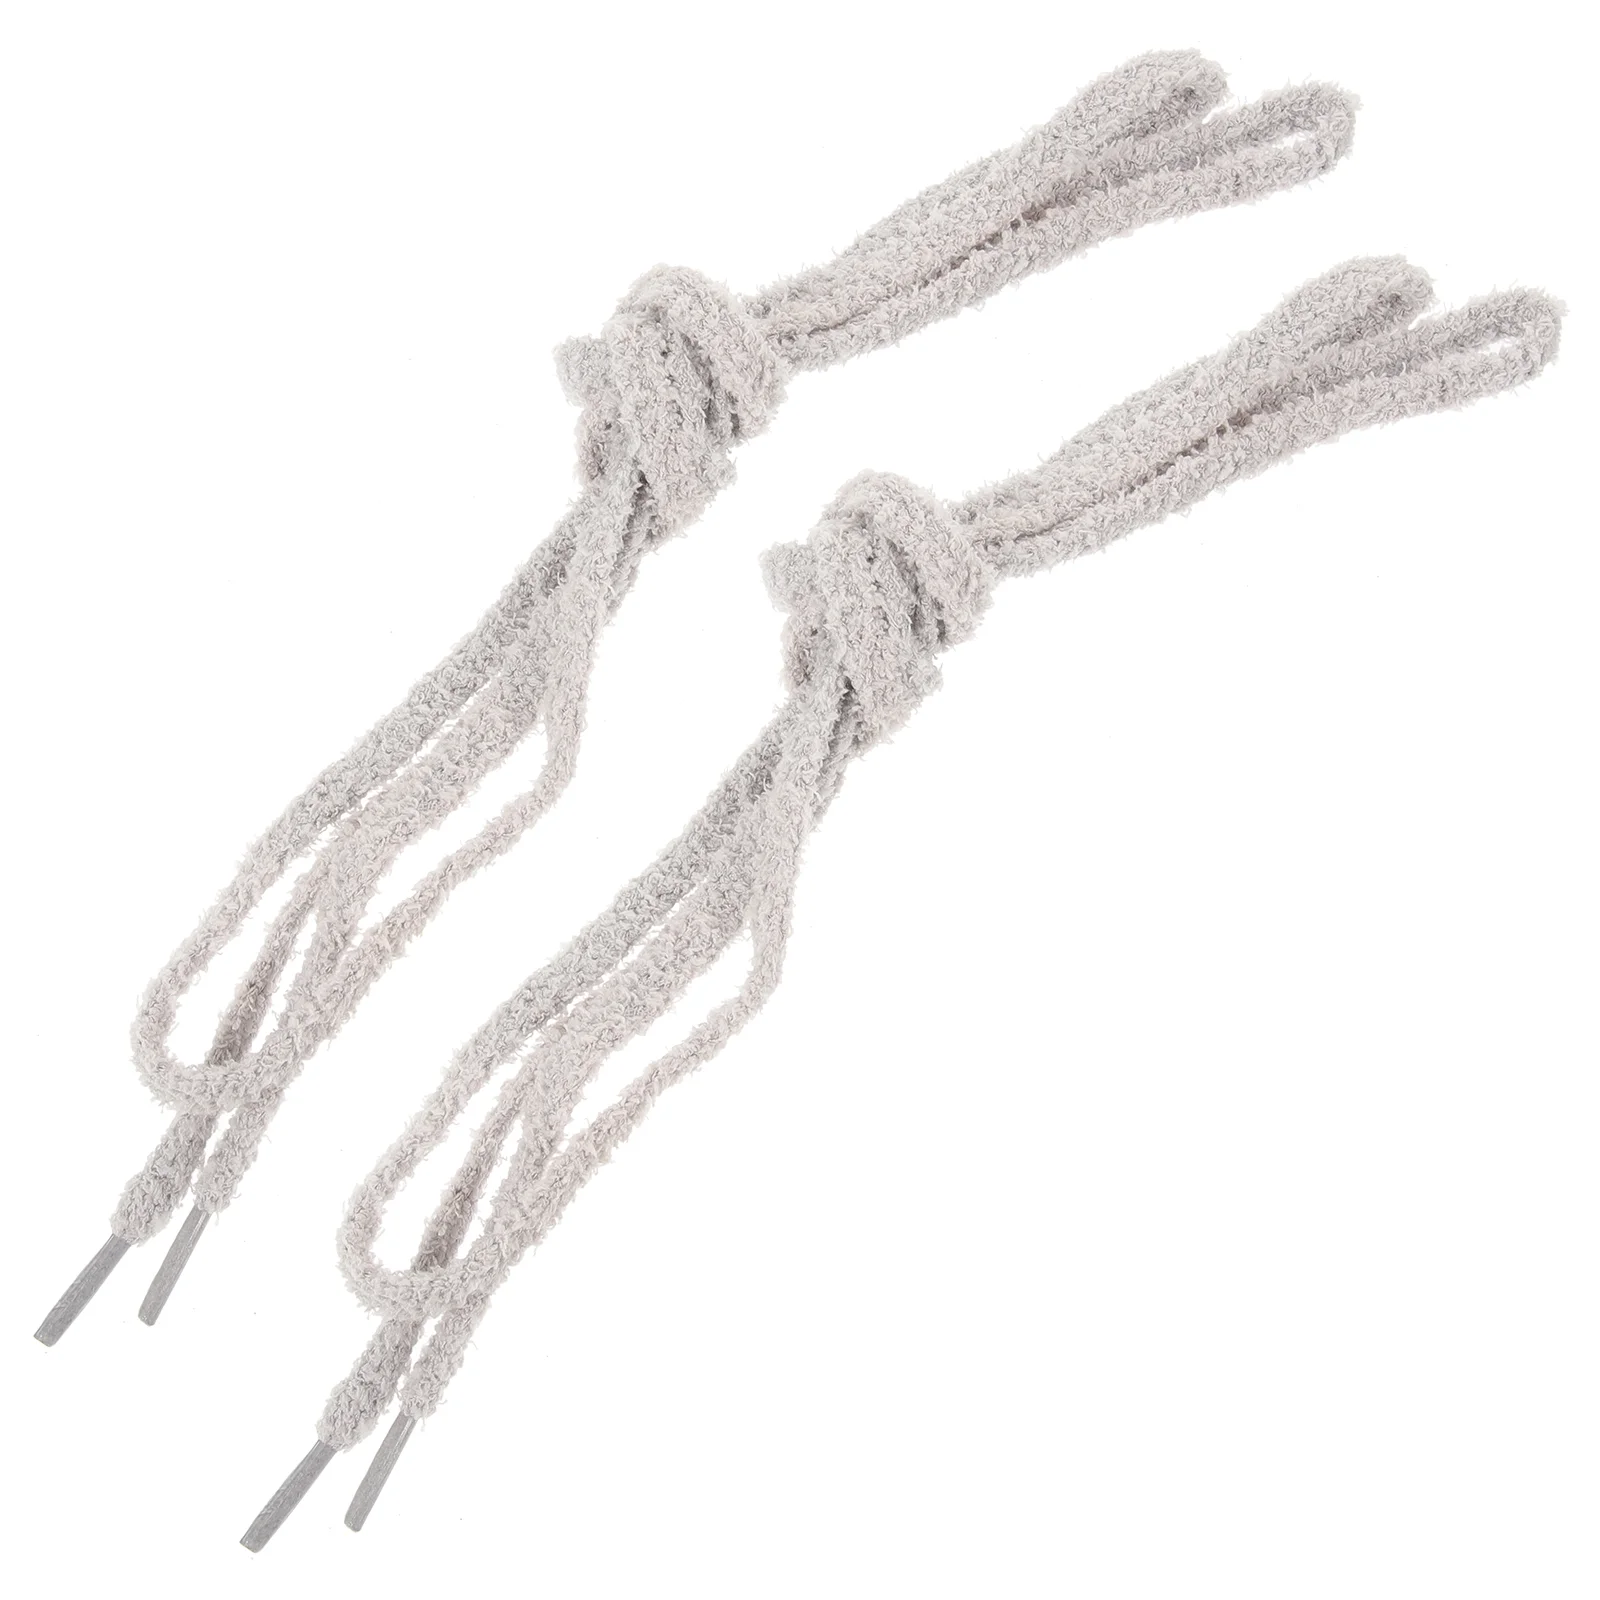 

White Shoe Laces Shoelace Outdoor Casual Accessory Replacement Sports Shoes Shoelaces for Sneakers Wide Shoestring